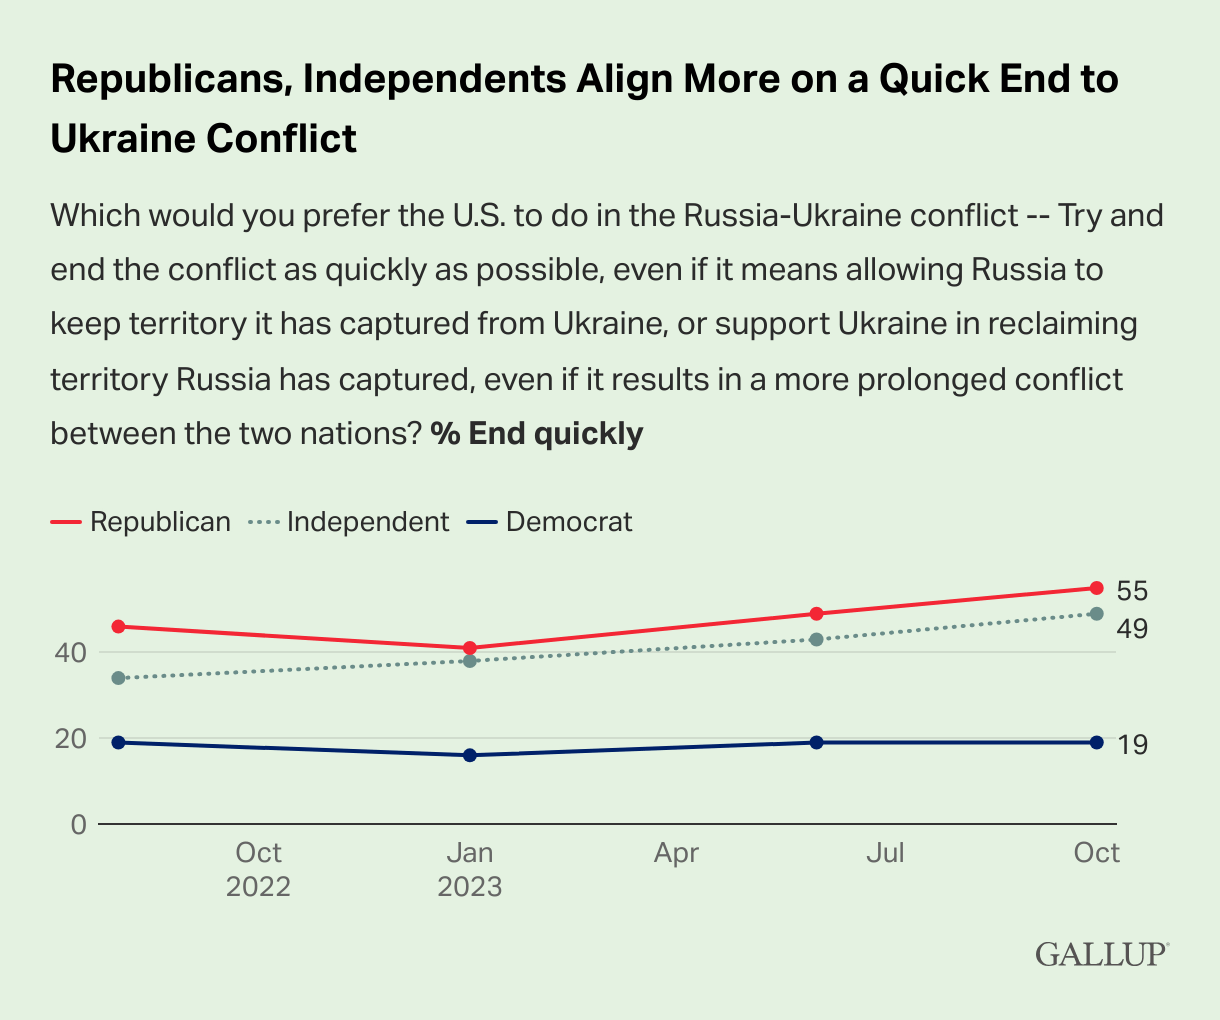 republicans-independents-align-more-on-a-quick-end-to-ukraine-conflict.png 우크라이나 전쟁 회의론과 피로감이 확산된 미국